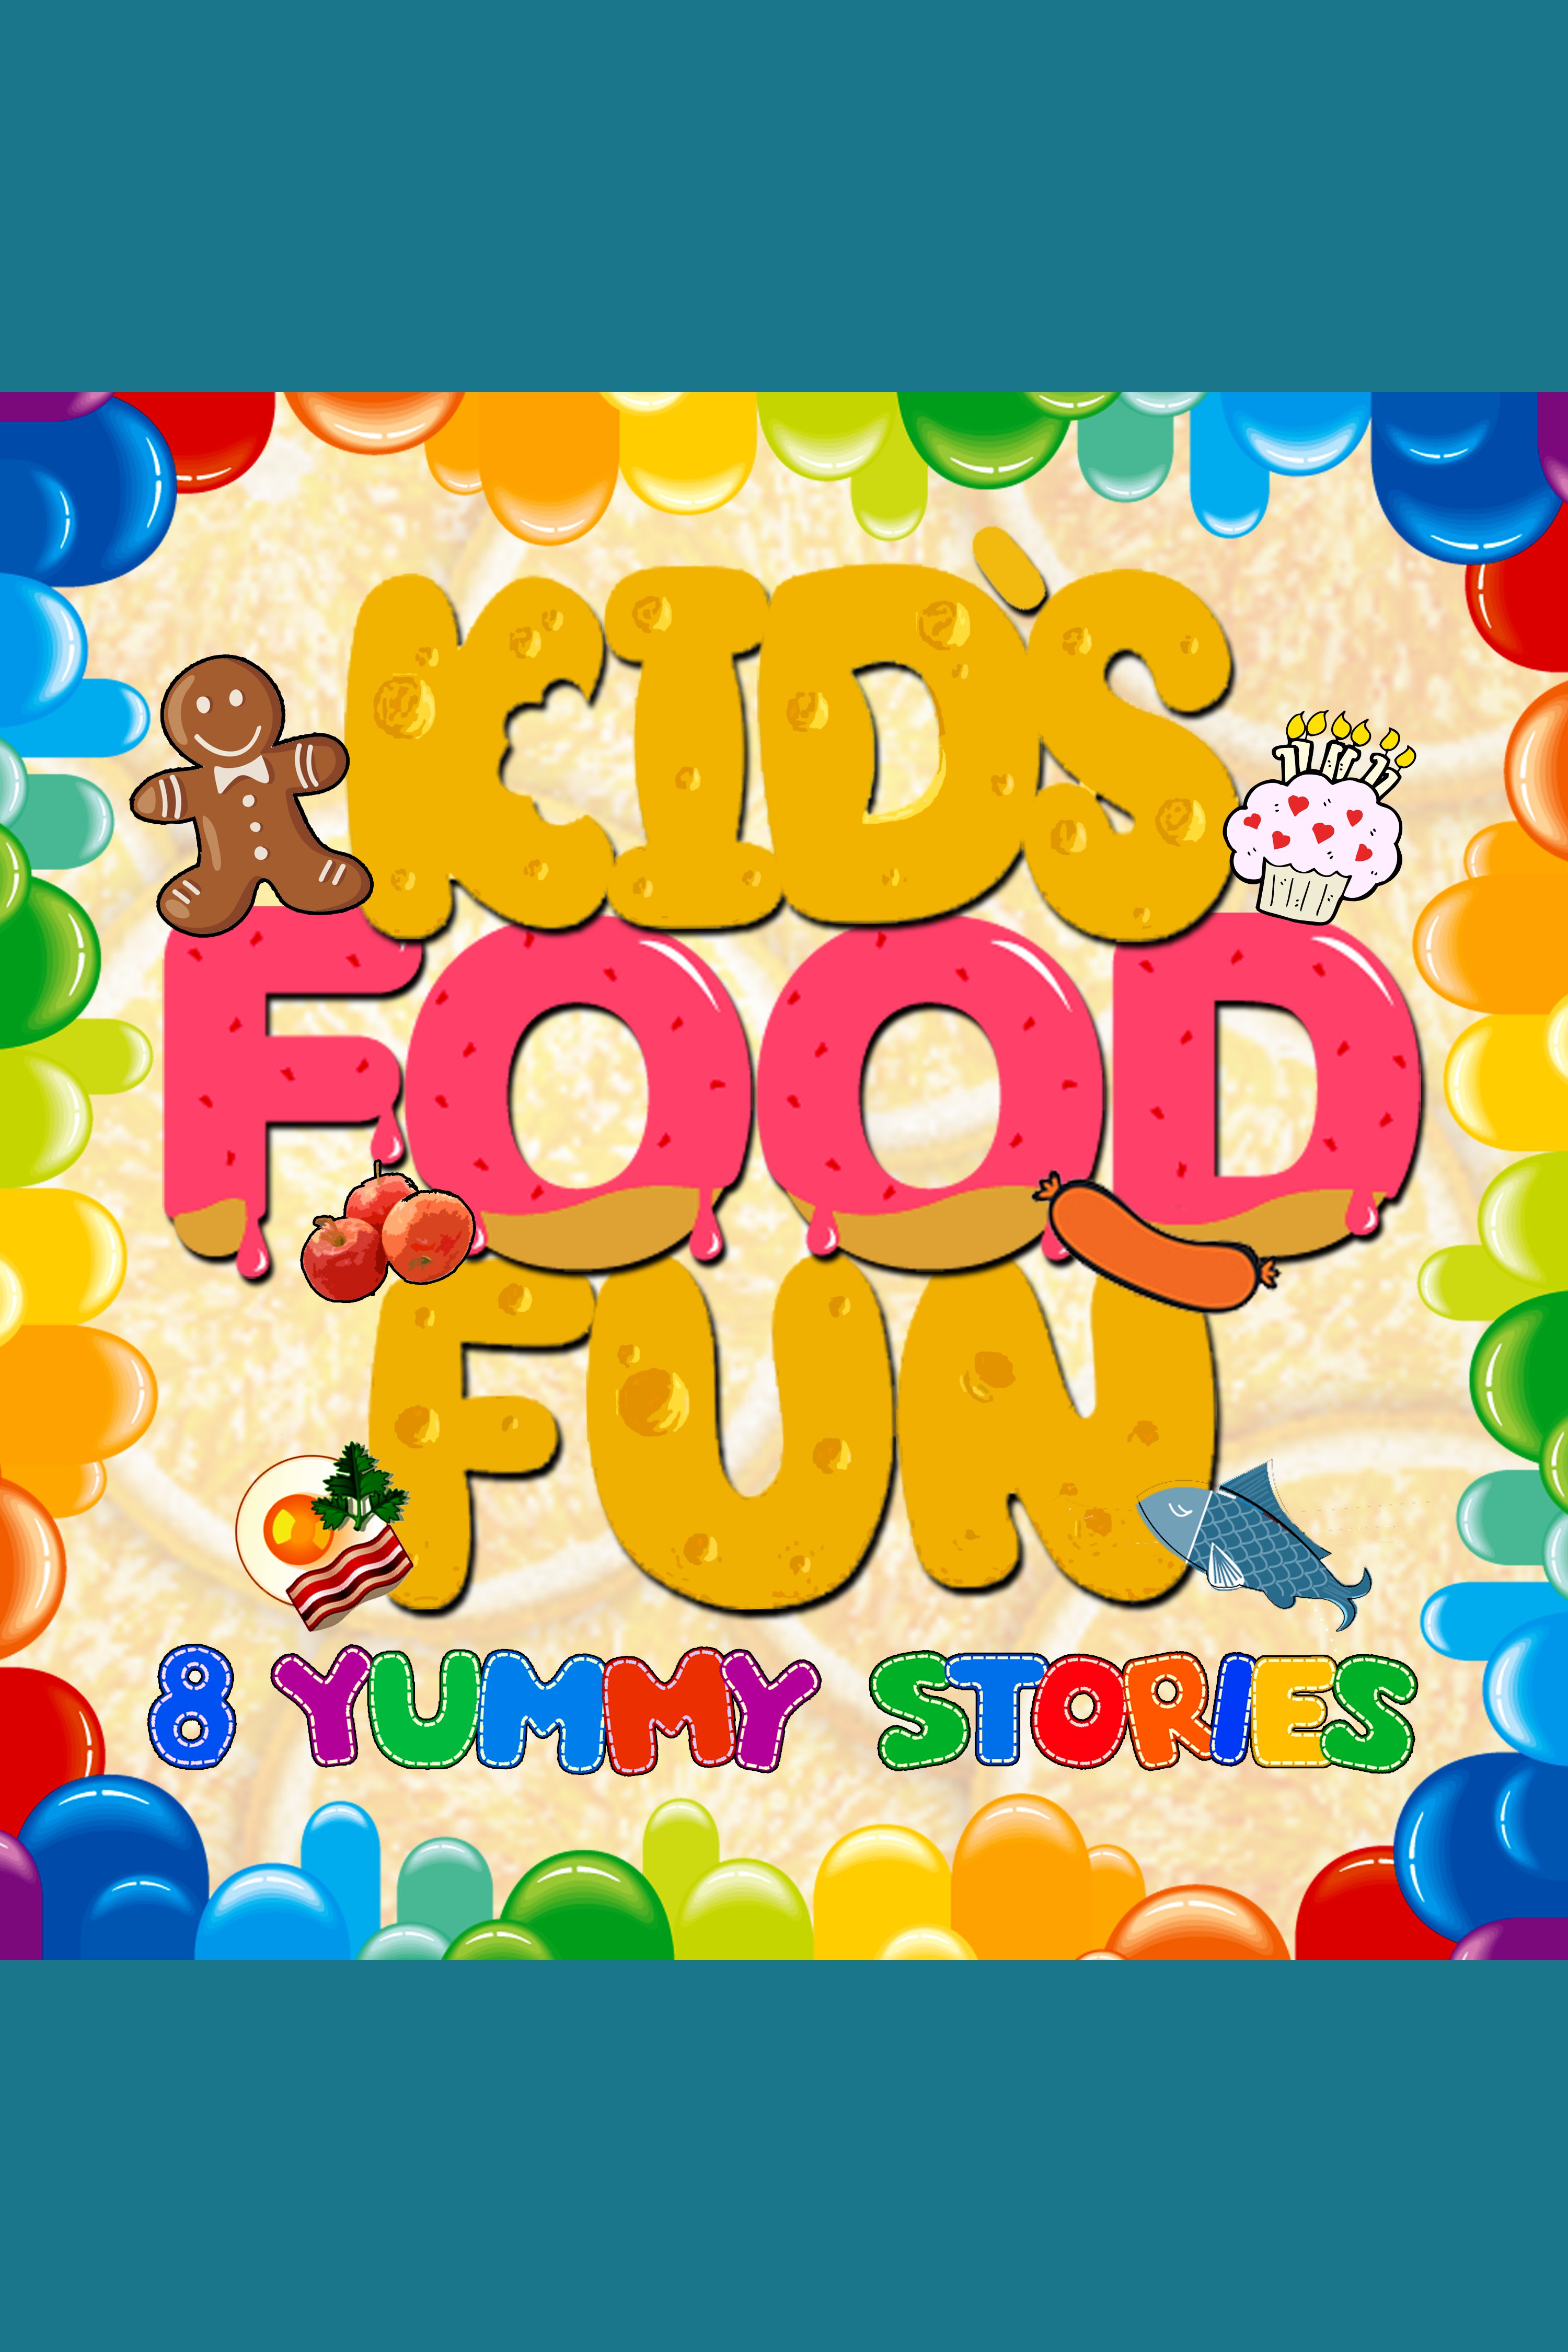 Kid's Food Fun: 8 Yummy Stories cover image